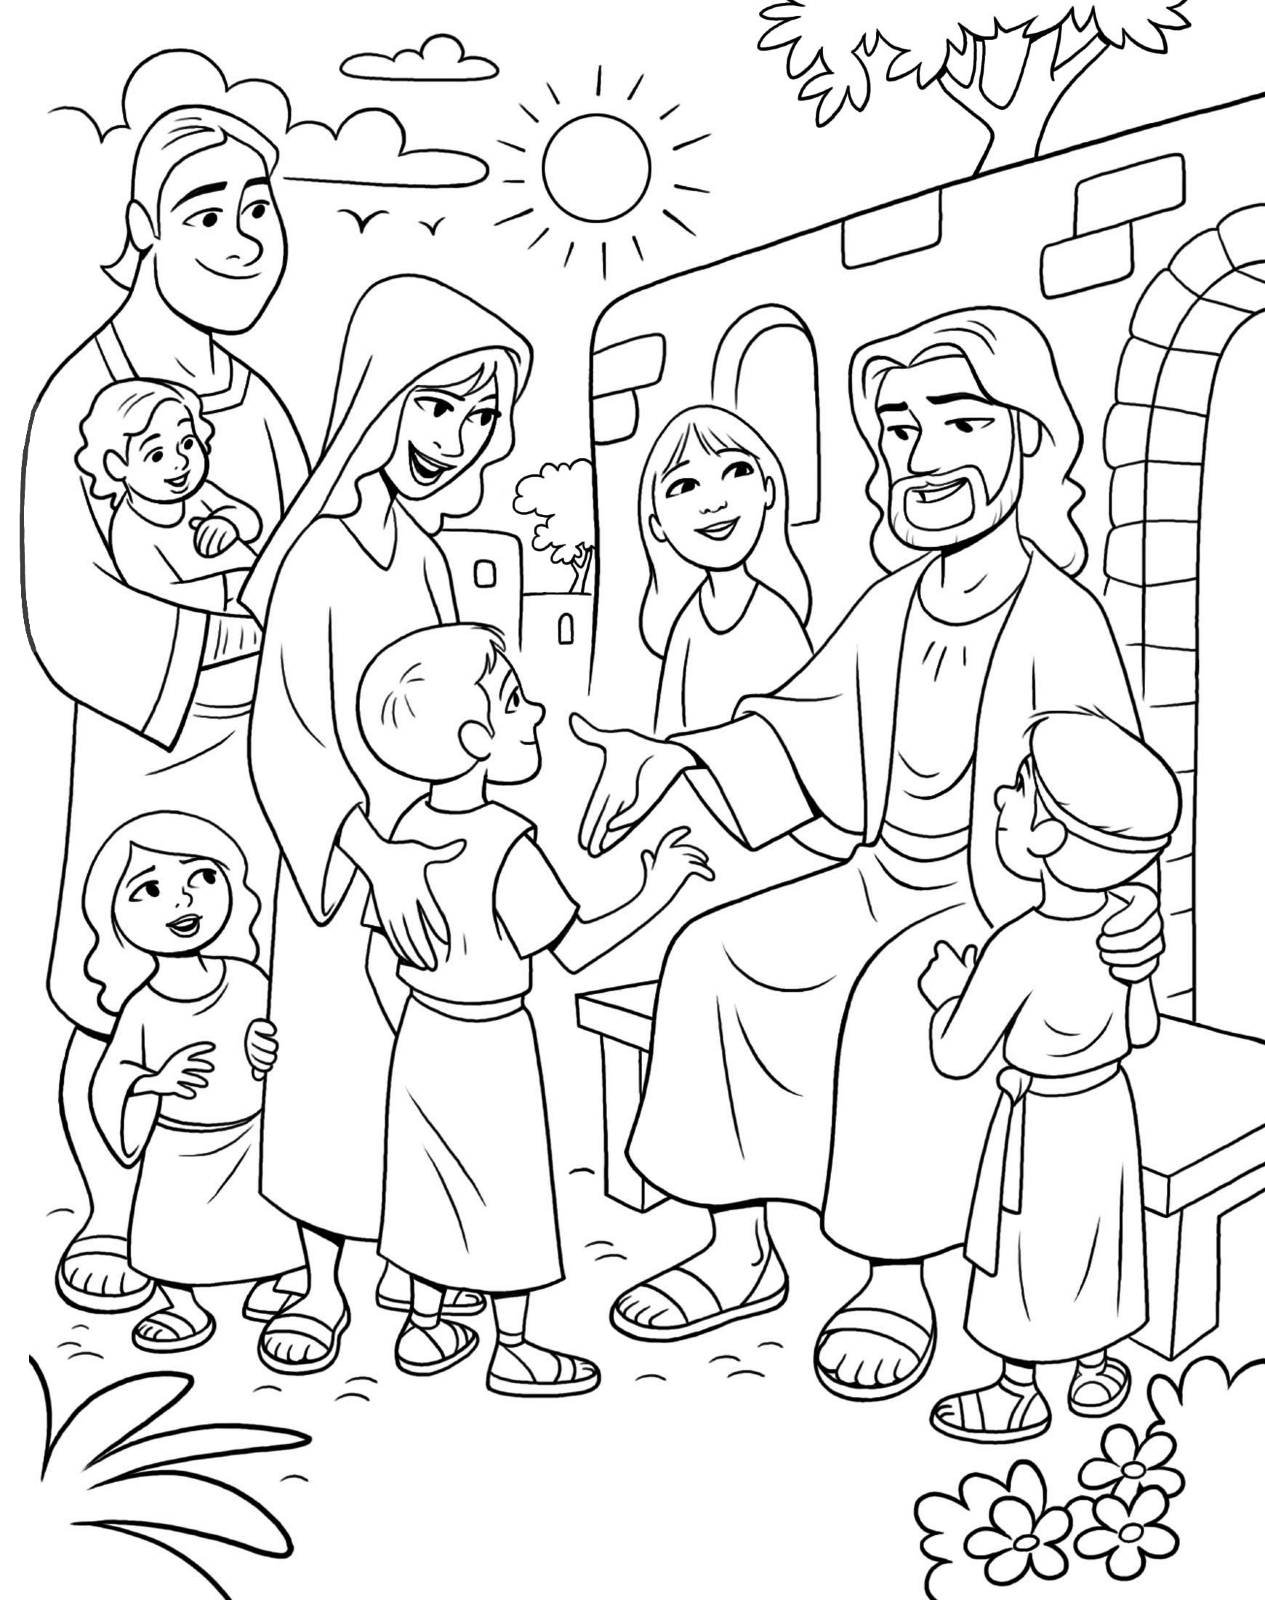 Elegant Lds Coloring Pages Jesus as A Child | Top Free Printable